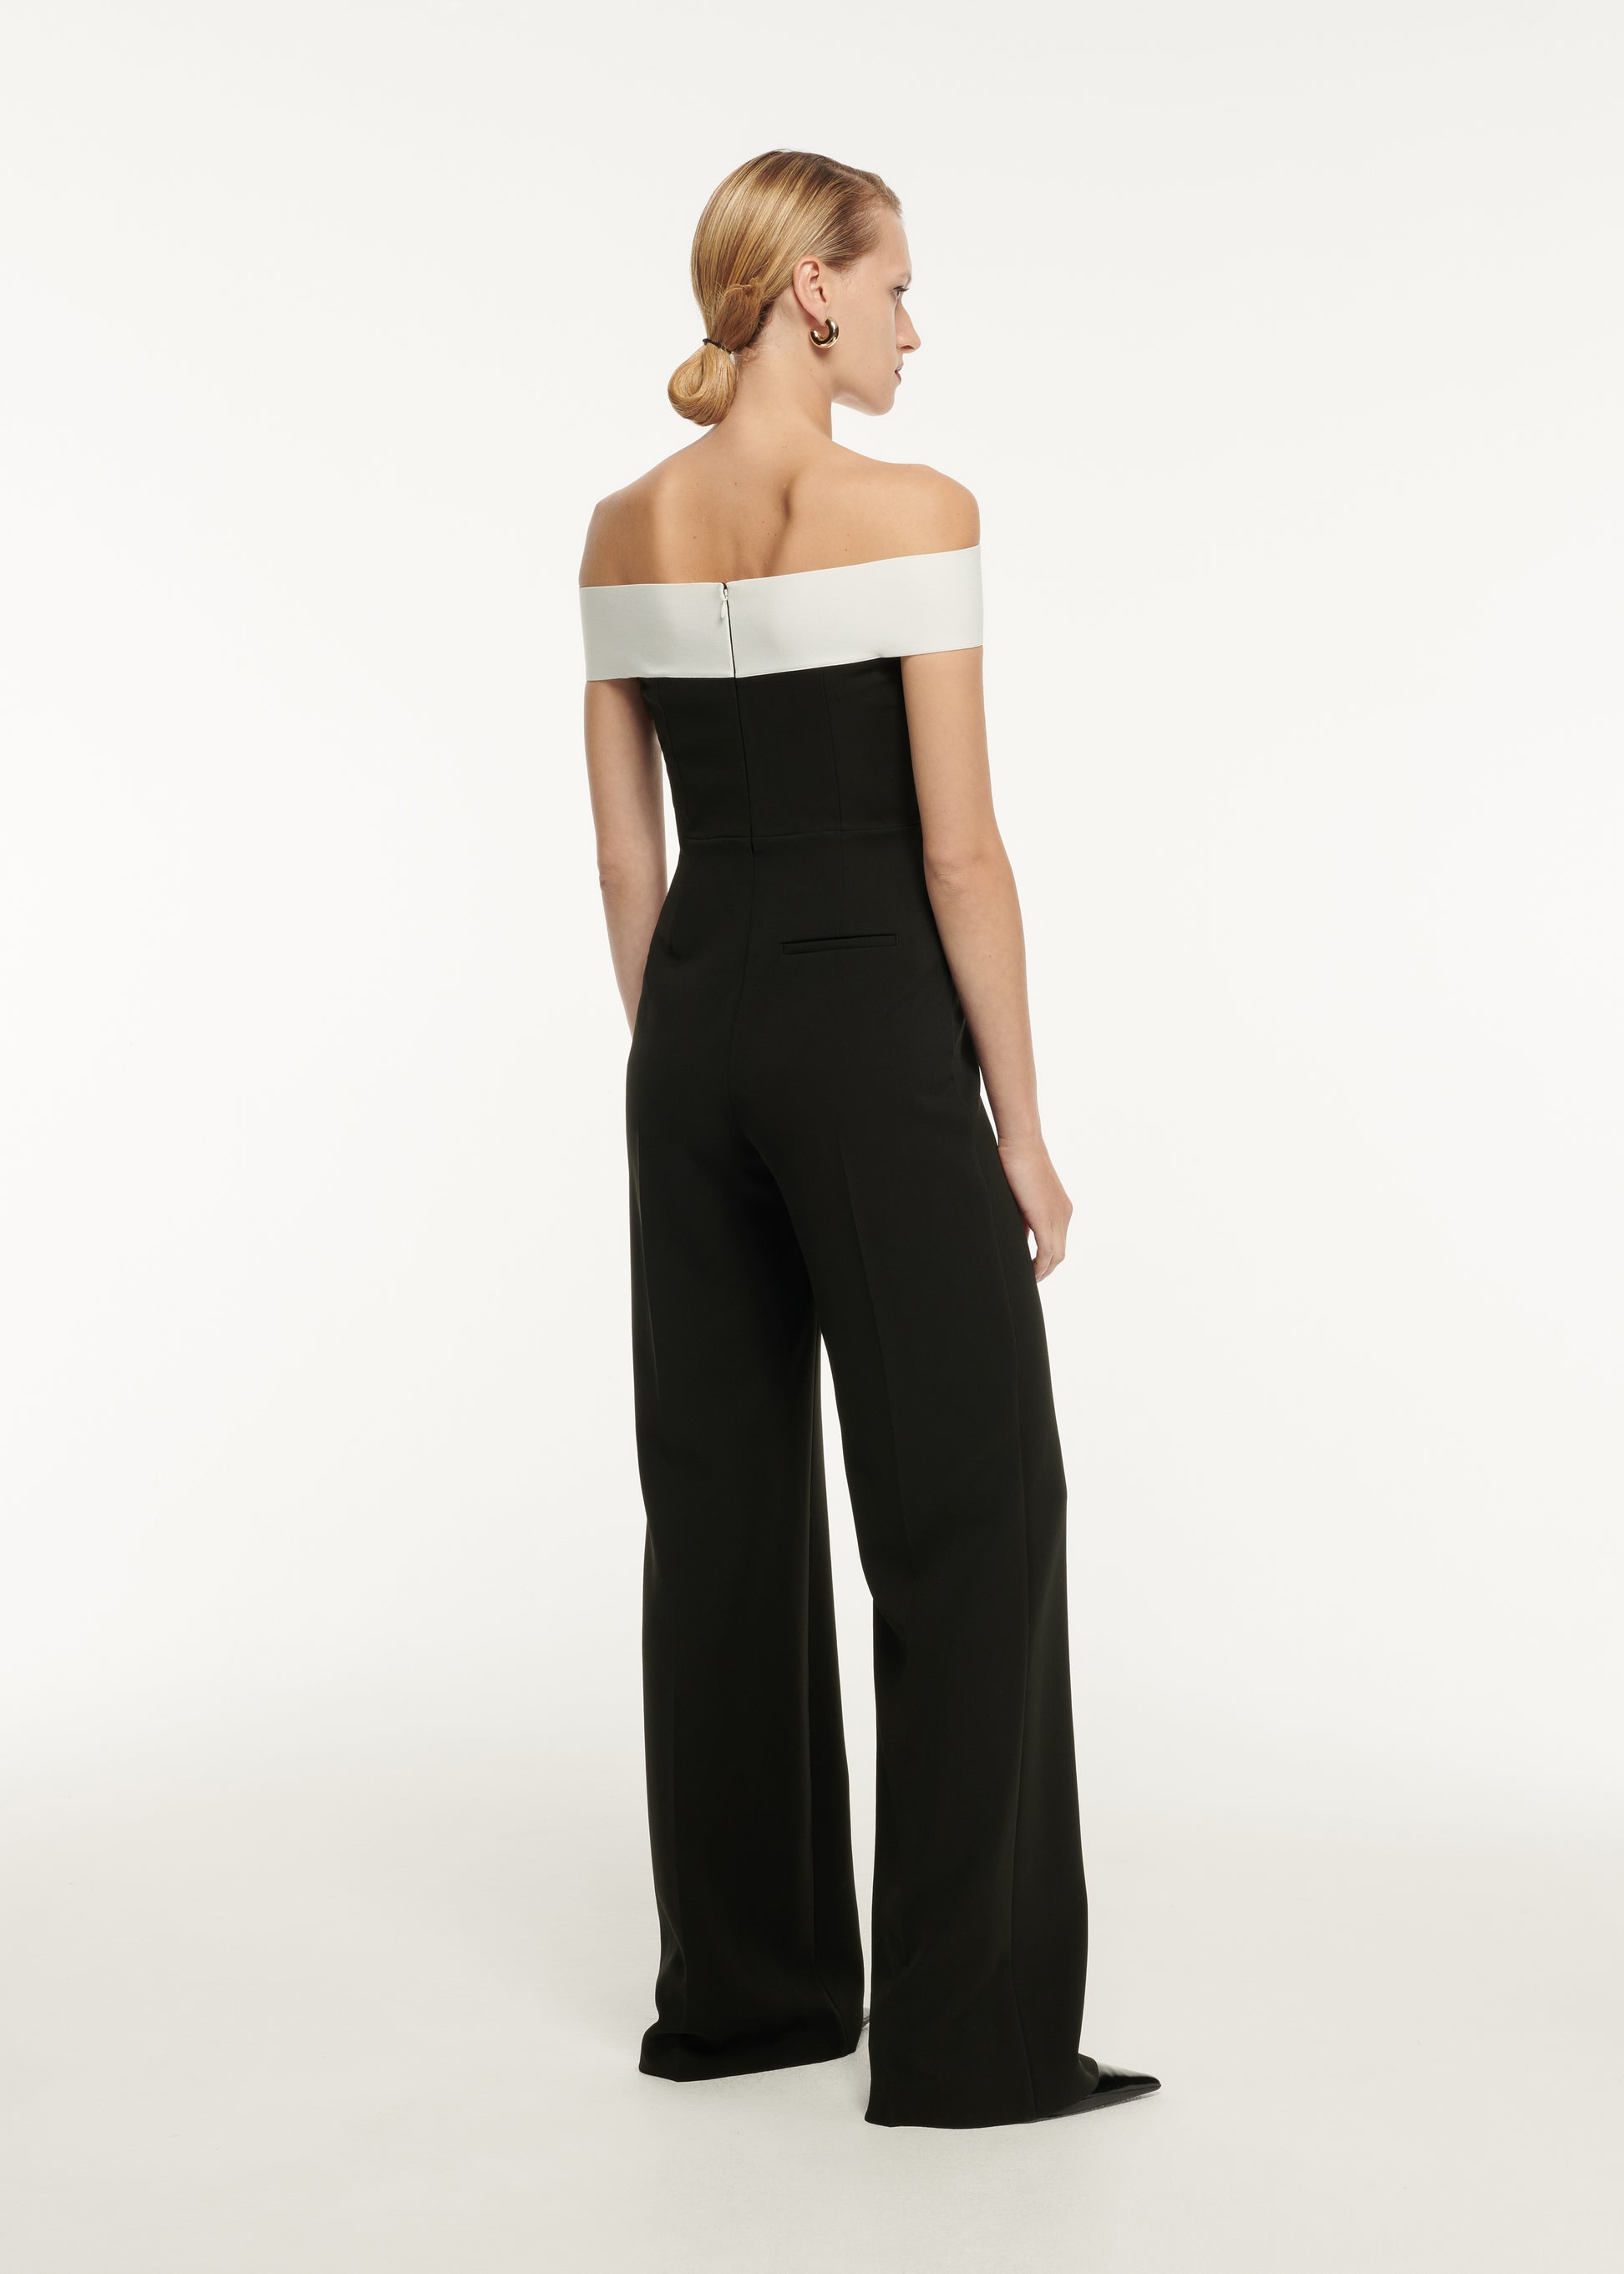 The back of a woman wearing the Off The Shoulder Stretch Cady Jumpsuit